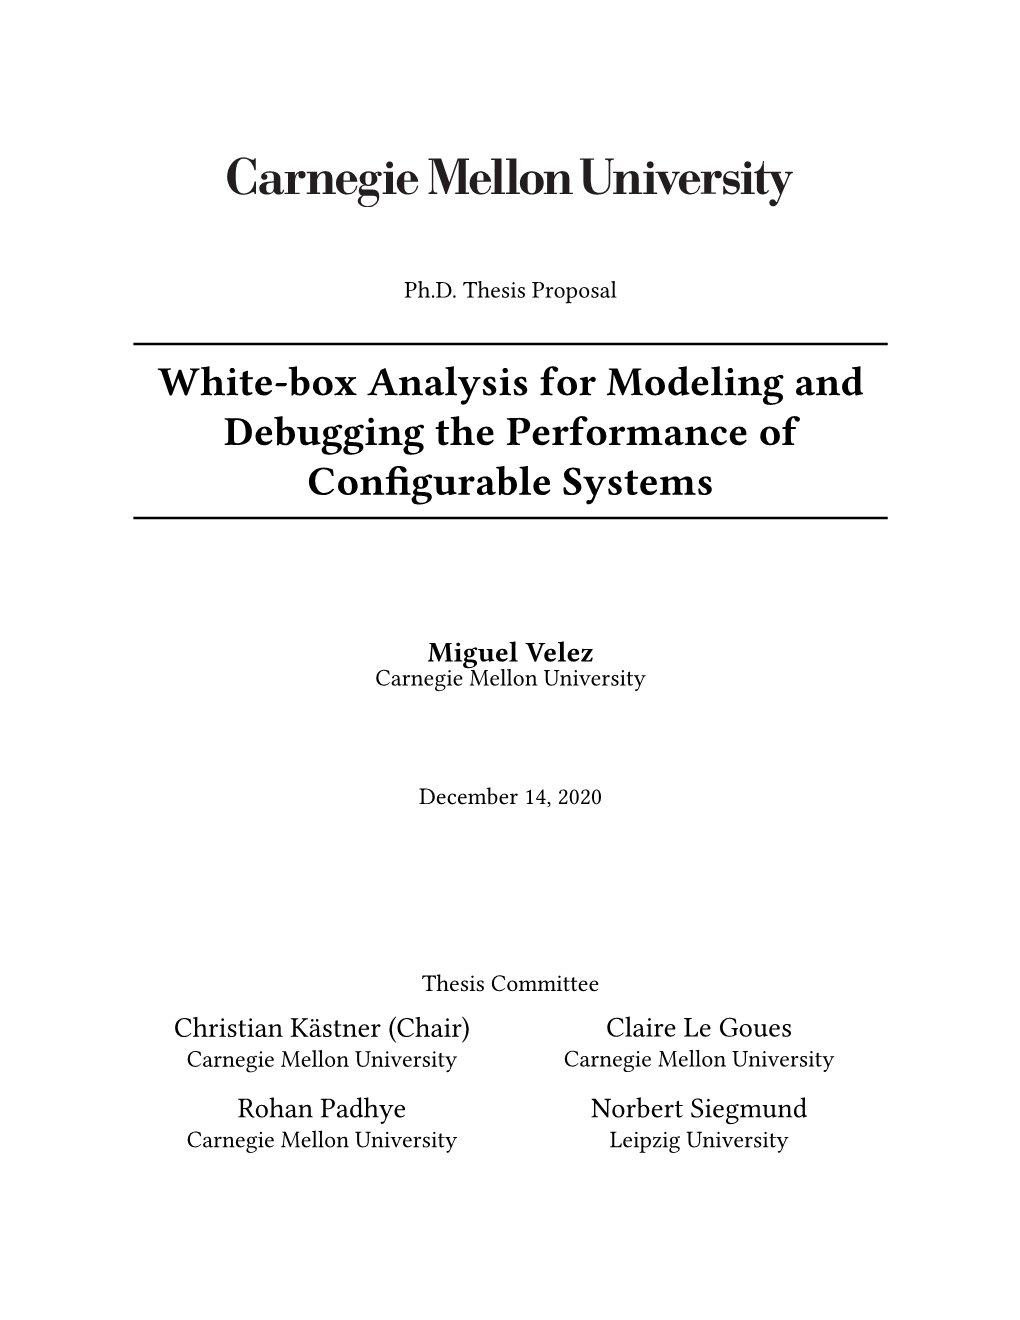 White-Box Analysis for Modeling and Debugging the Performance of ConGurable Systems